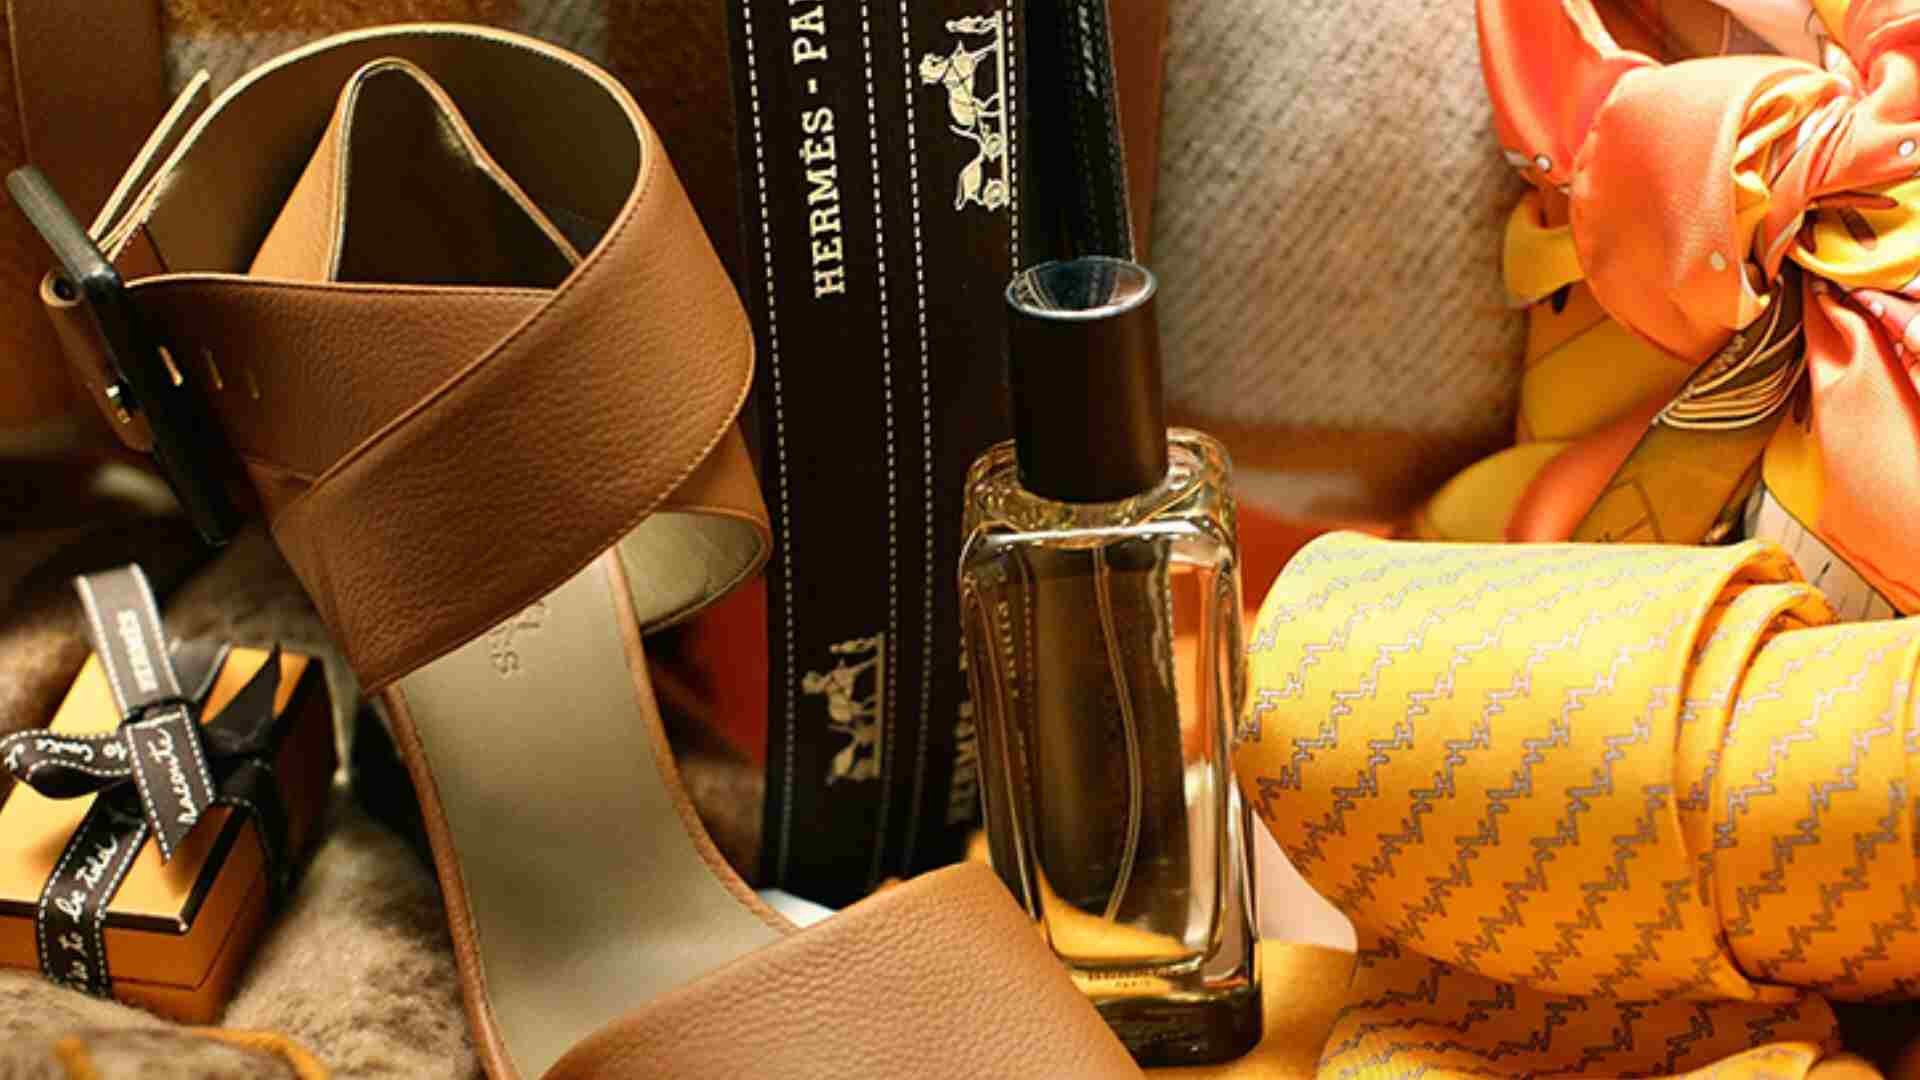 Indian Consumer’s Preference For Branded Luxury Products Rising